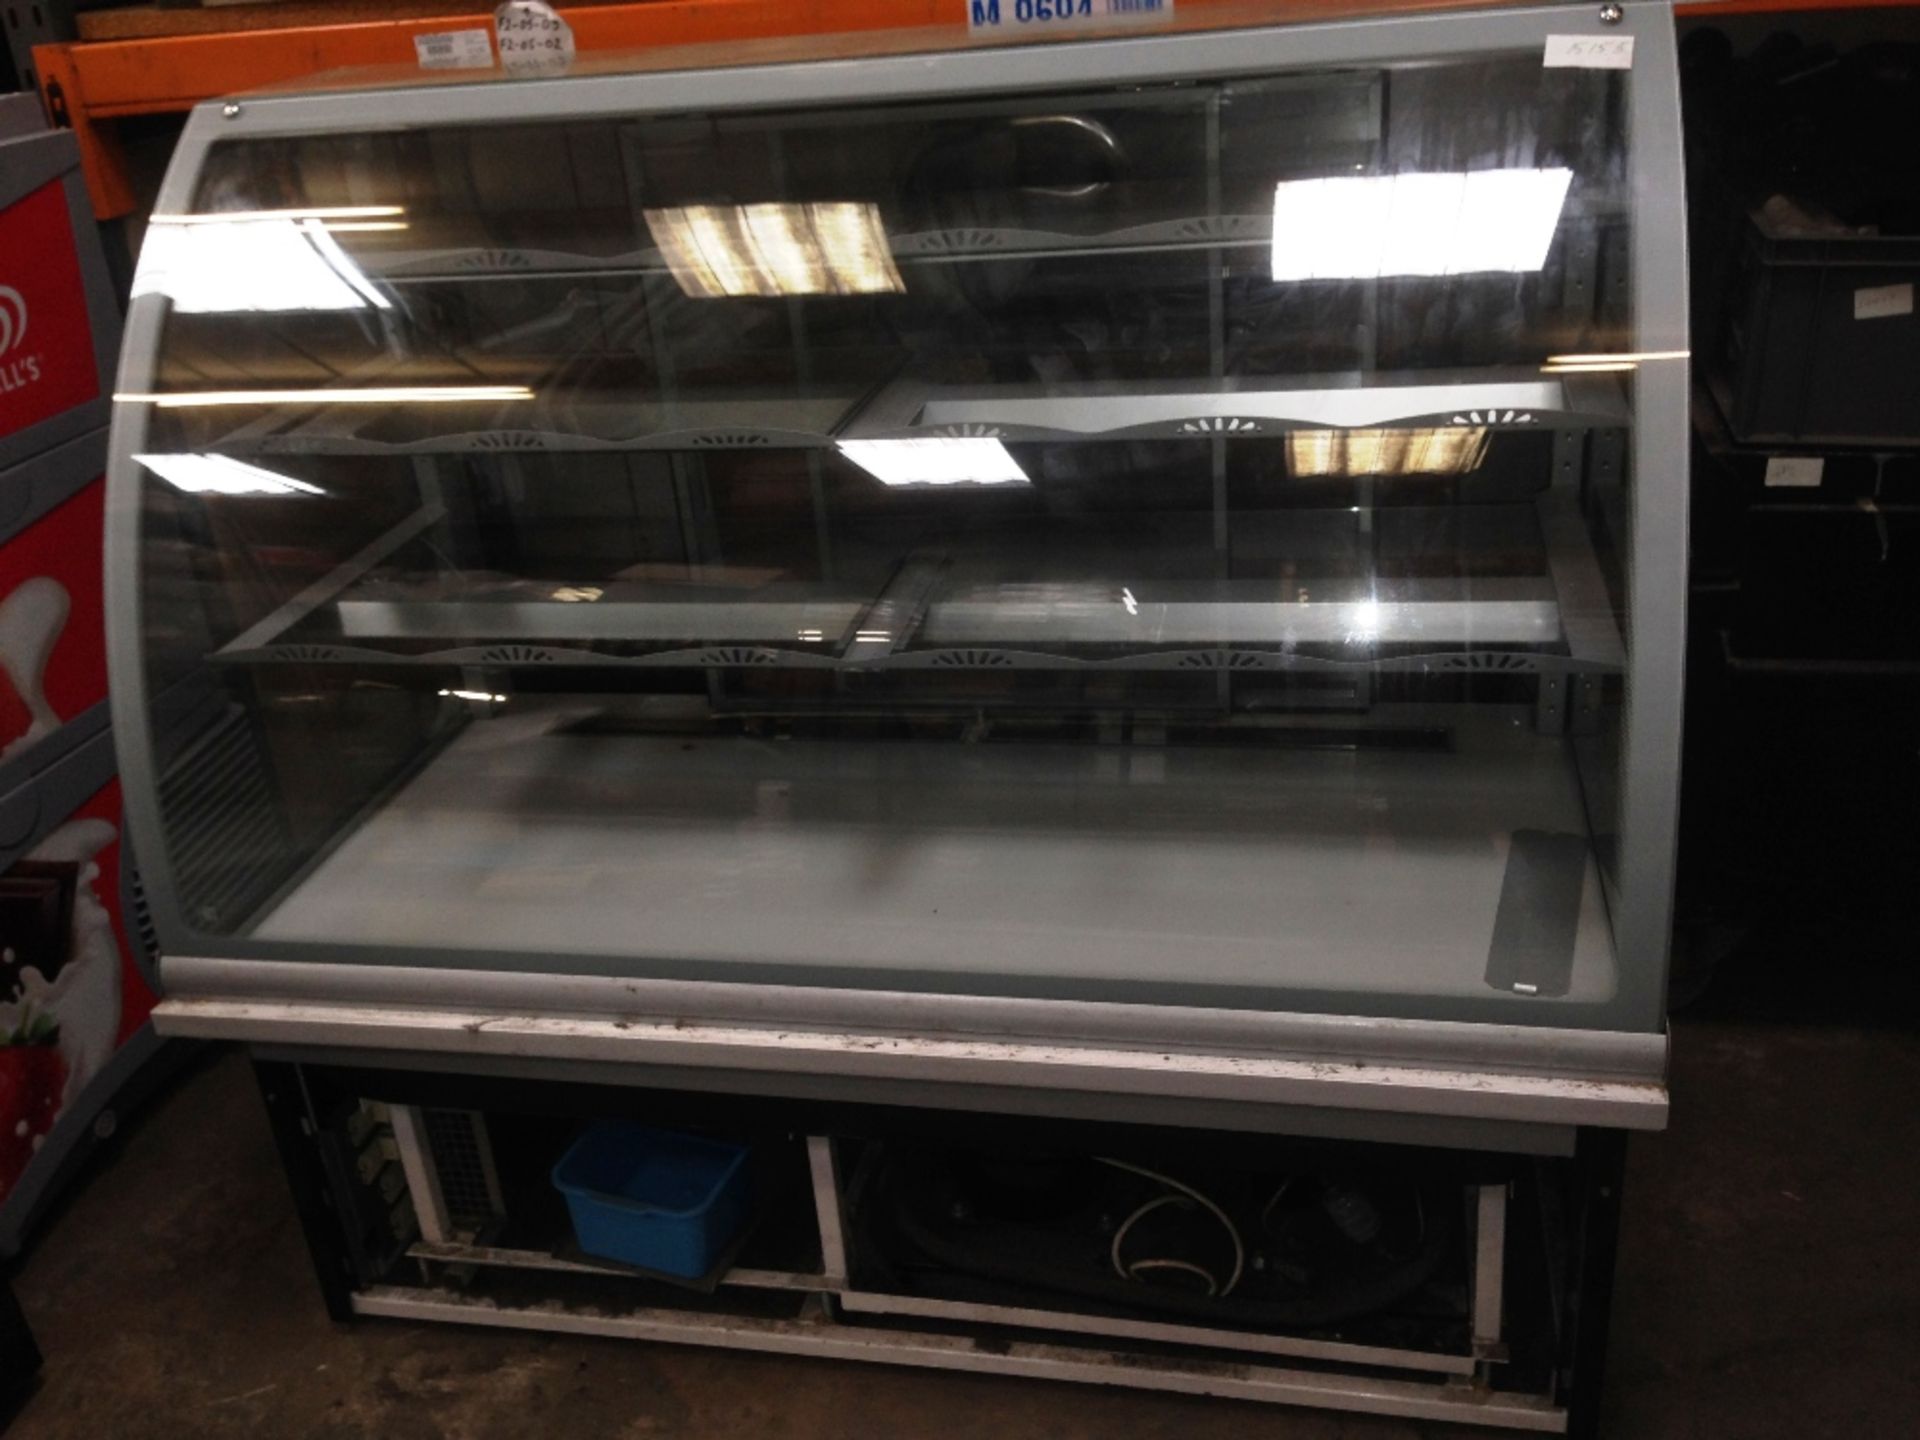 Nuttall 144cm Refrigerated serve over display counter - internal glass shelves and light